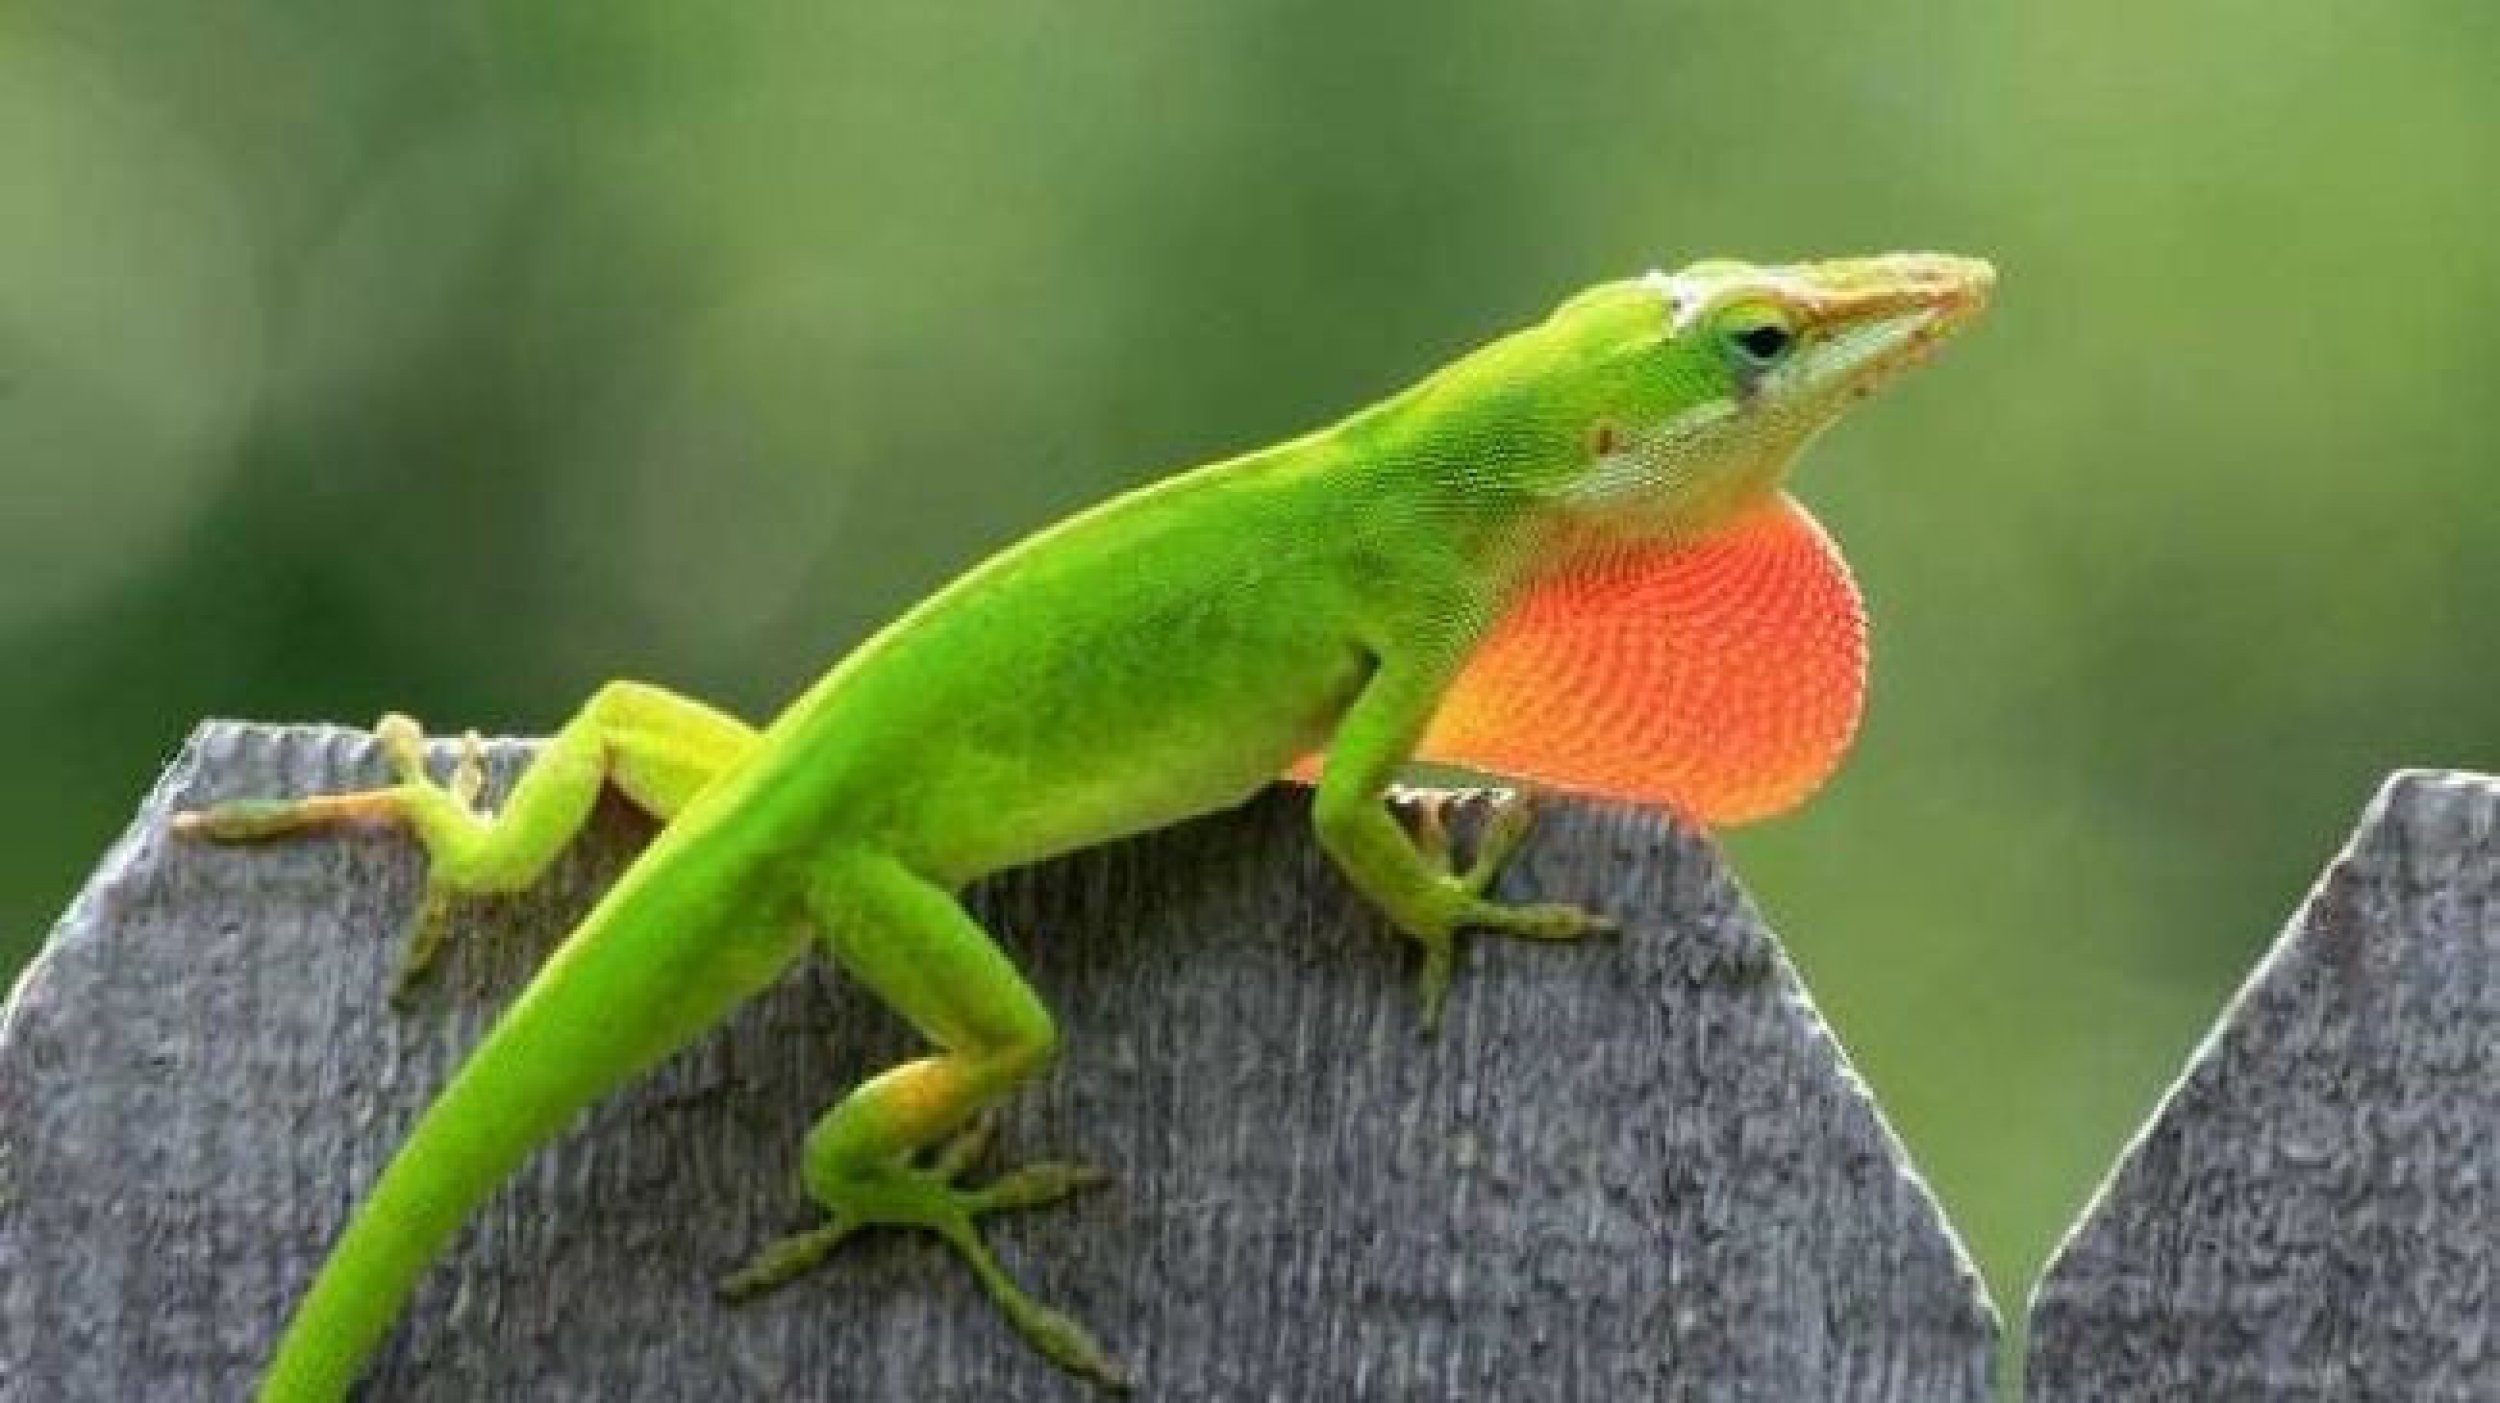 Evolution Secrets Revealed Lizard Genes Sequenced for the First Time